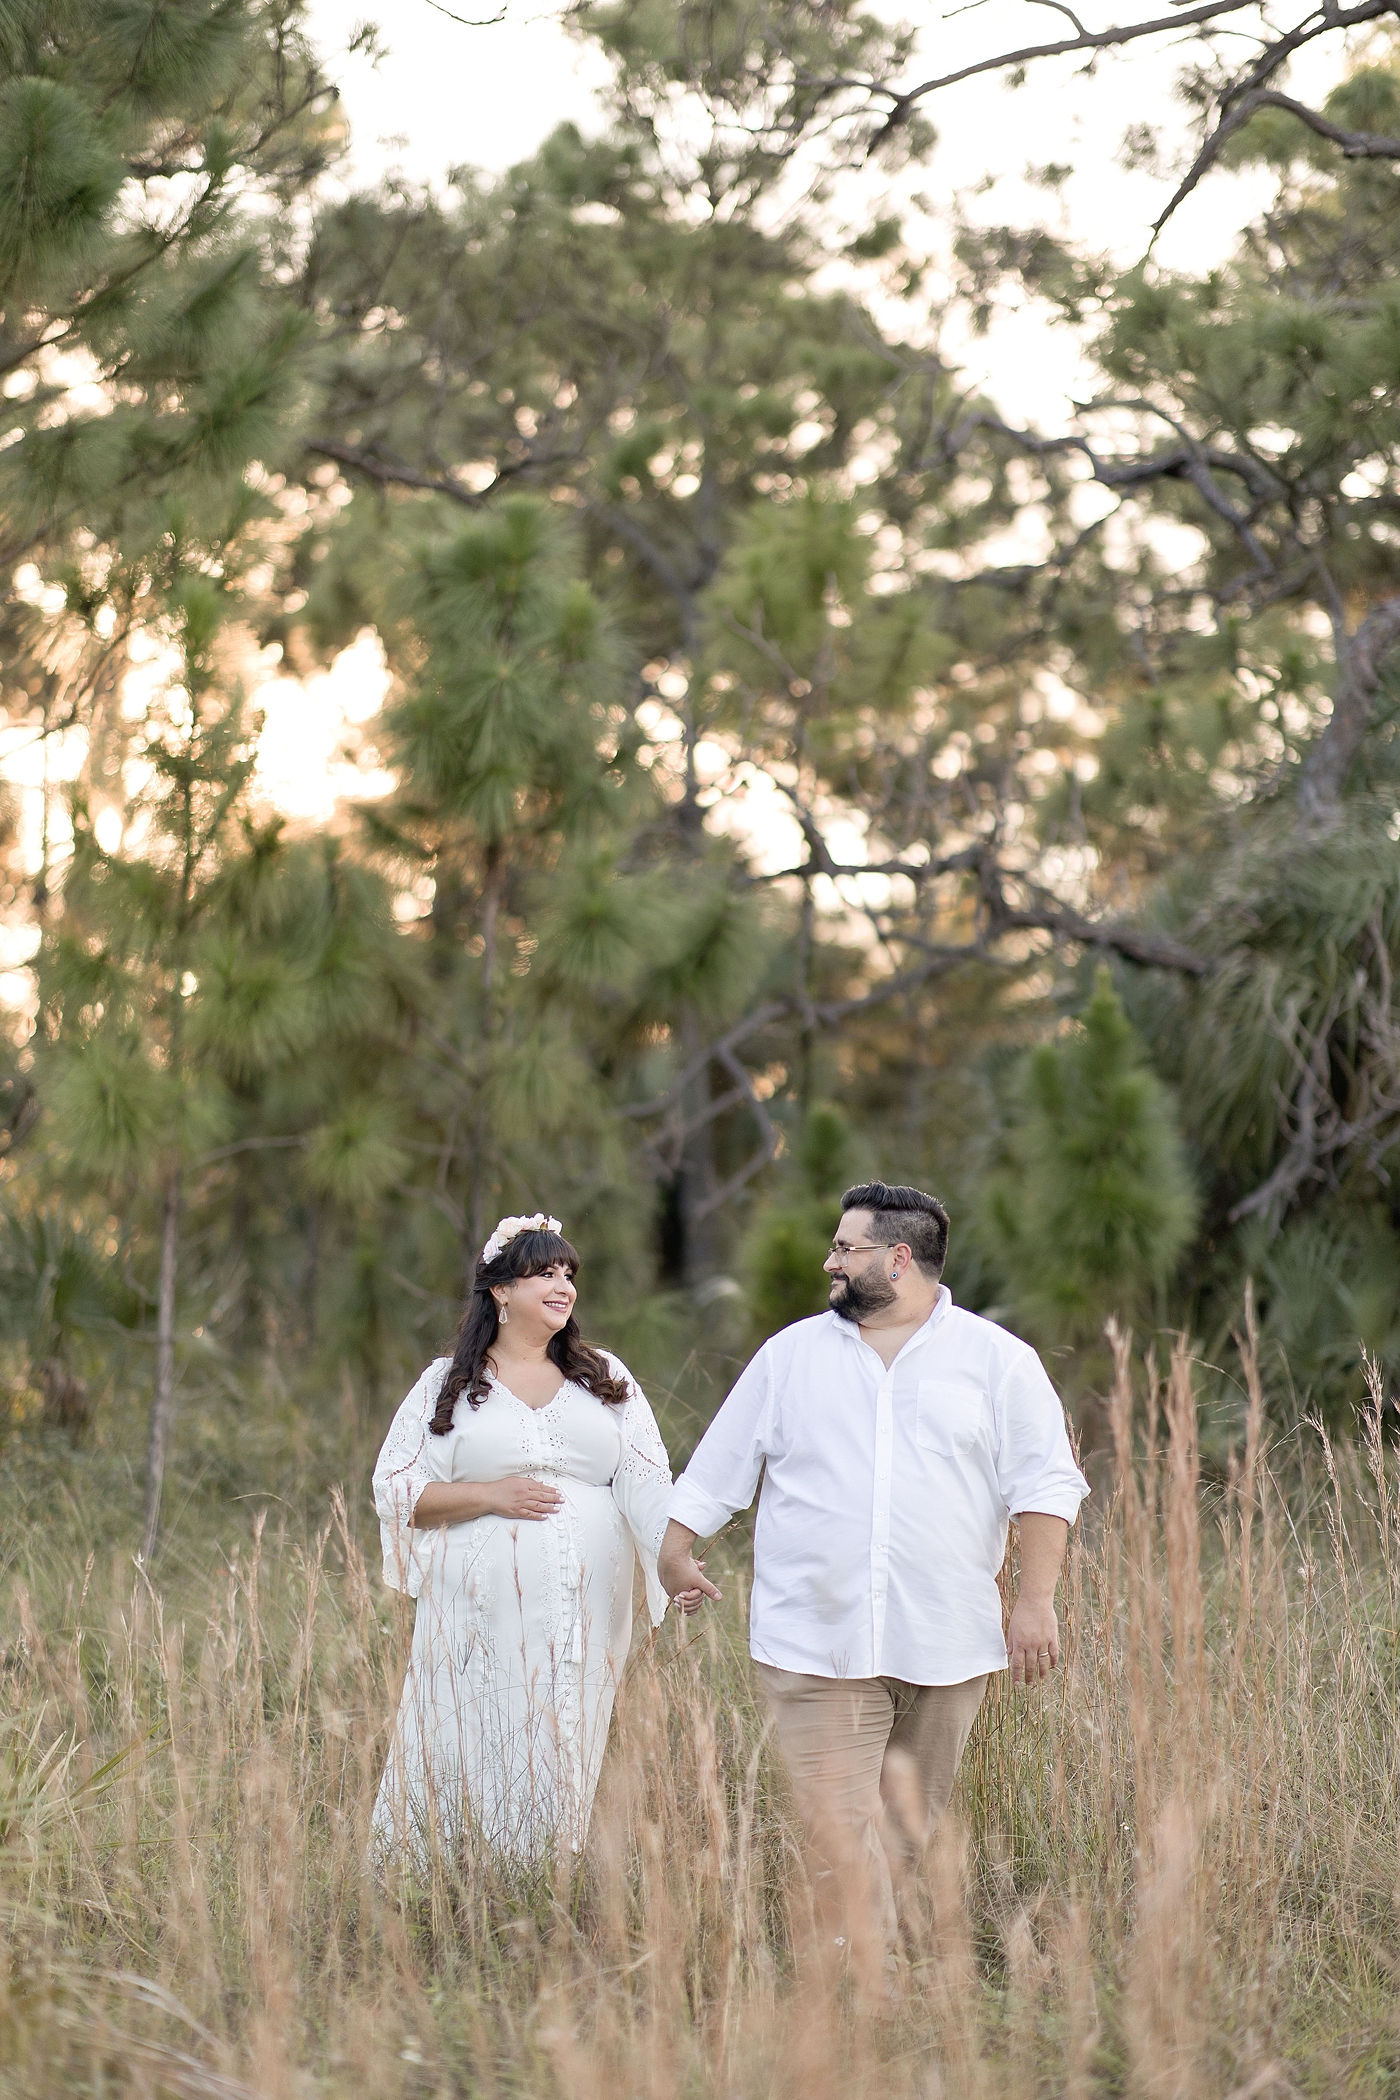 Plus Size Maternity Photoshoot with Mom and dad walk in field during Miami maternity session. Photo by South Florida Maternity Photographer Ivanna Vidal Photography.